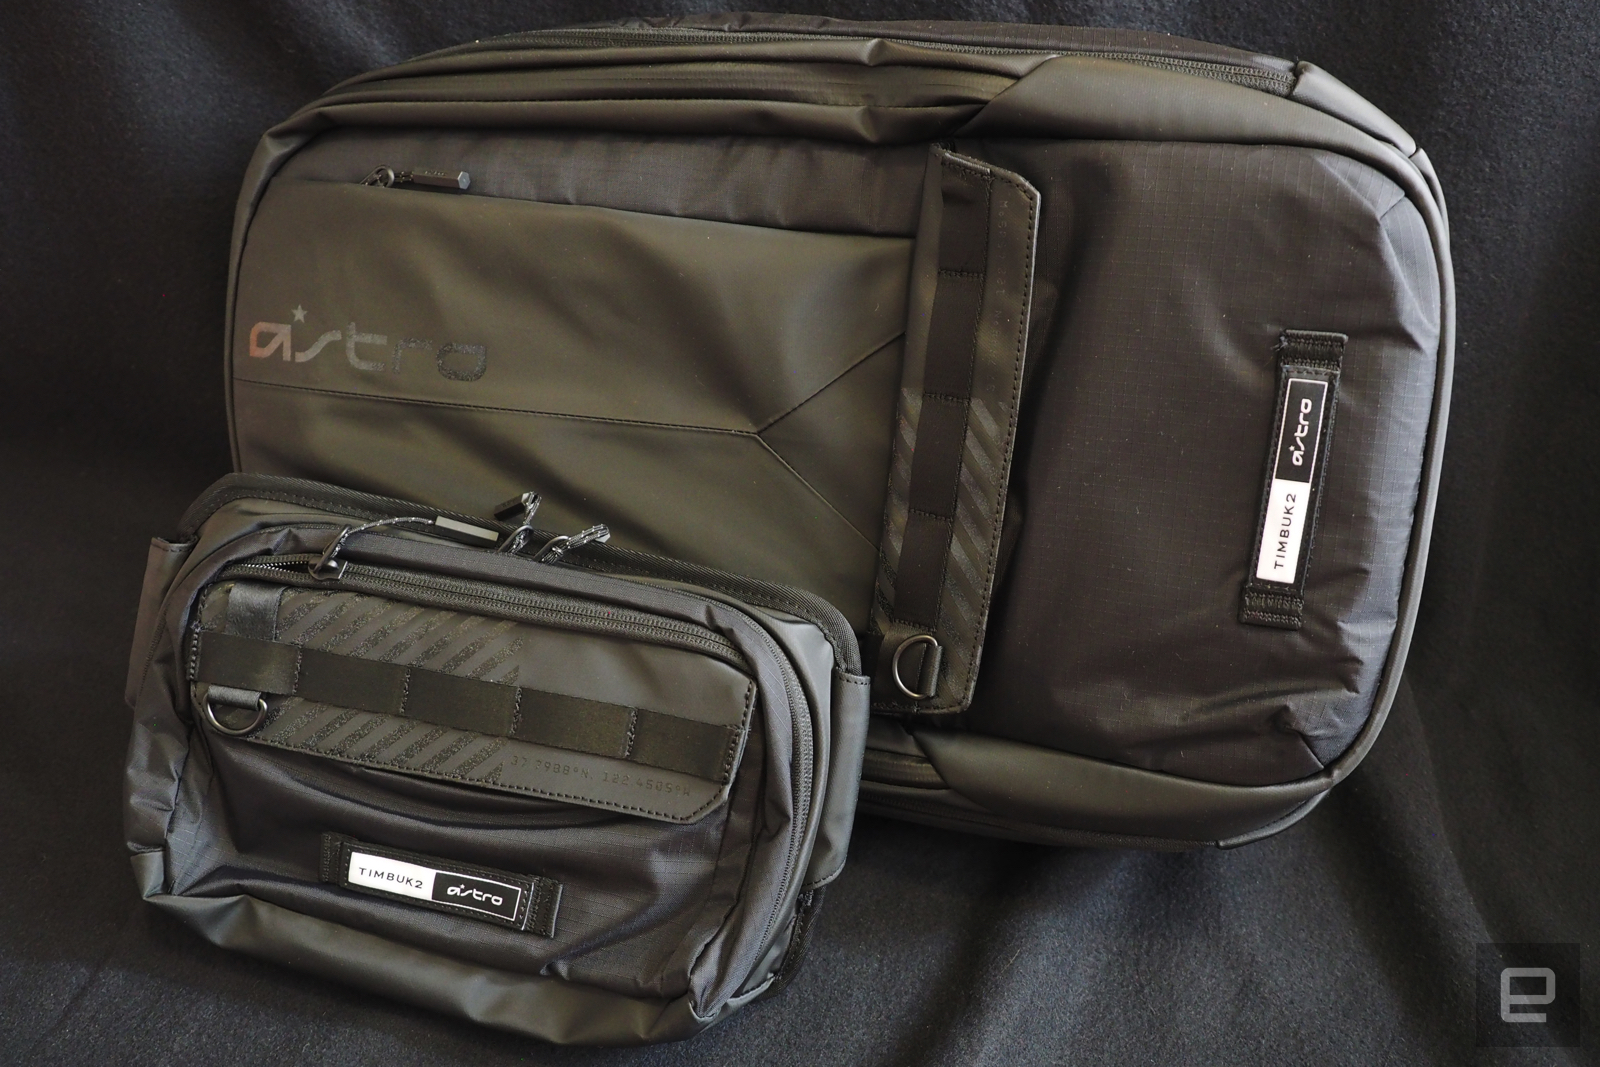 Astro groups up with Timbuk2 to assemble the relaxation gamer bags